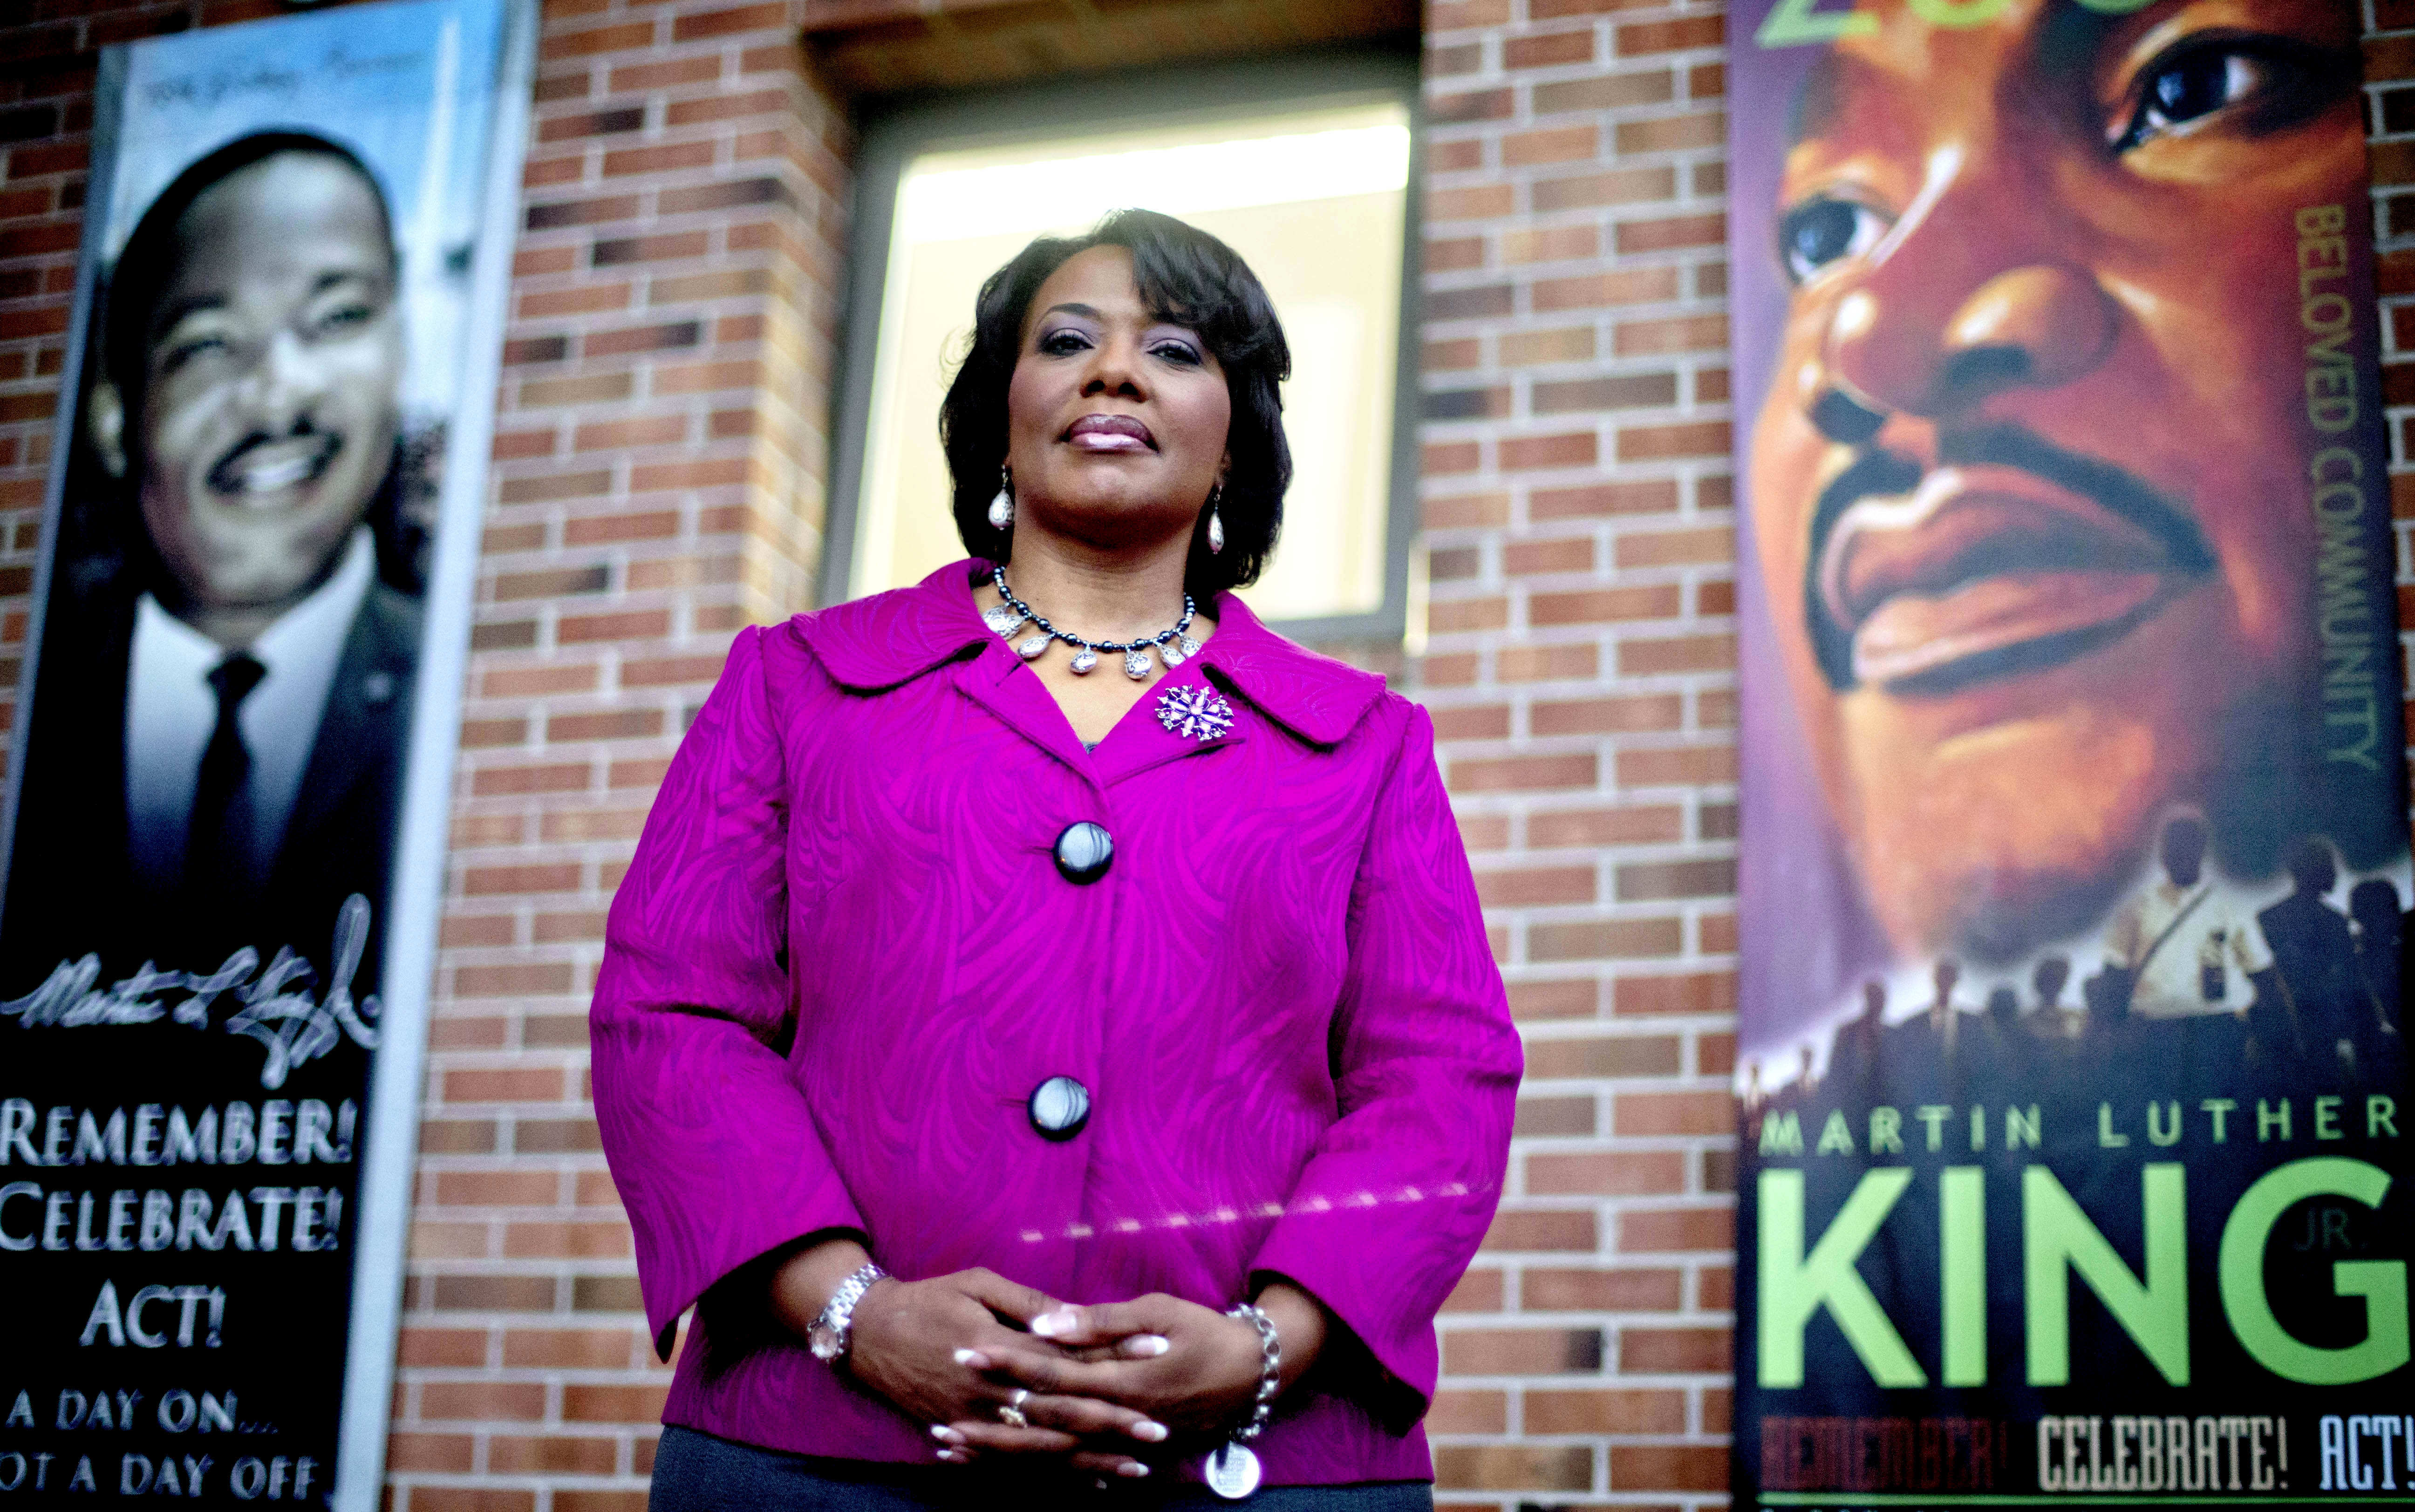 Martin Luther King’s Daughter Keeps His Legacy Alive5184 x 3246